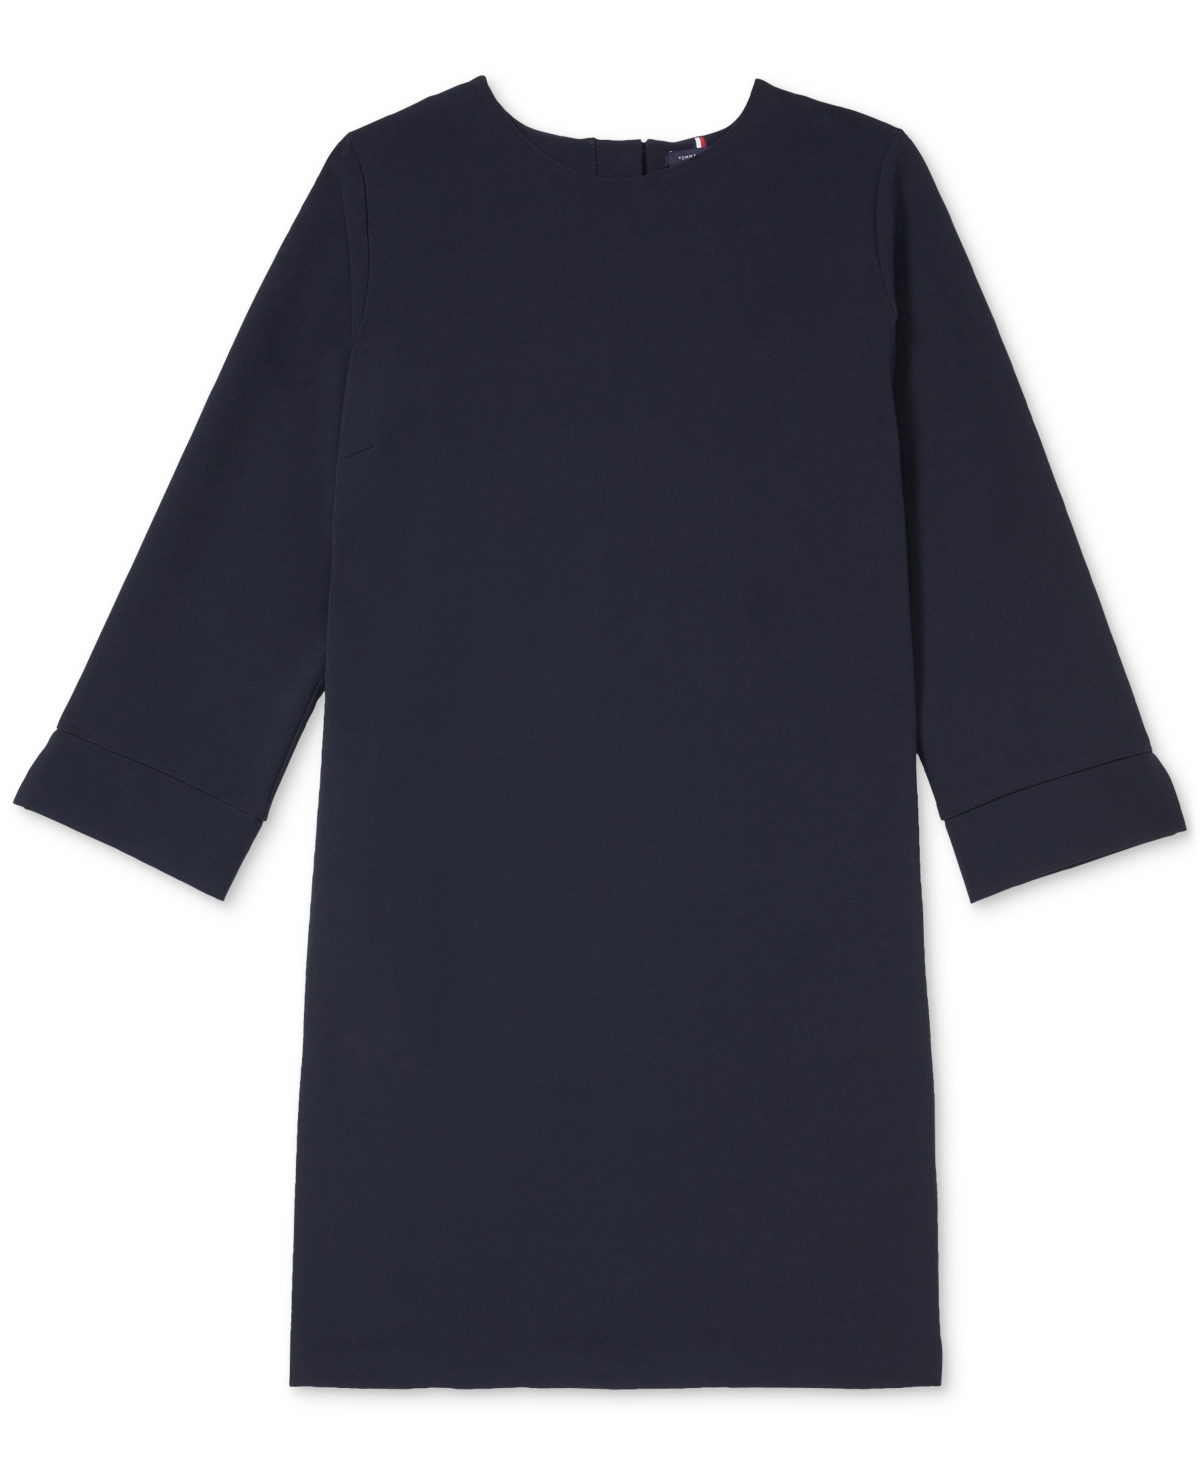 Tommy Hilfiger Adaptive Women's Angela Shift Dress with Magnetic Closures